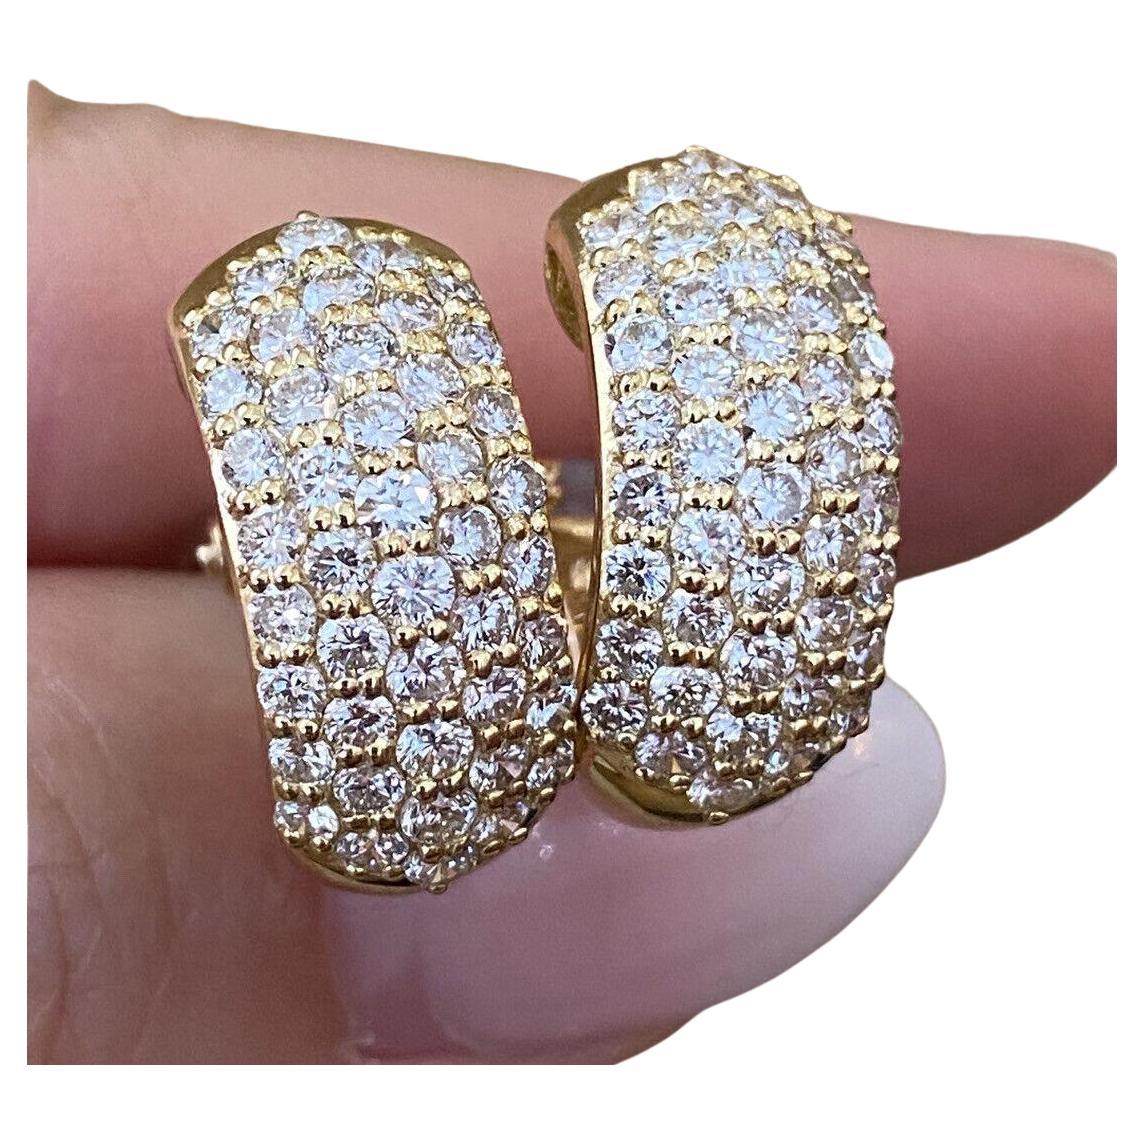 5 Row Pave Diamond Half Hoop Earrings 2.74 carat total weight in 18k Yellow Gold For Sale